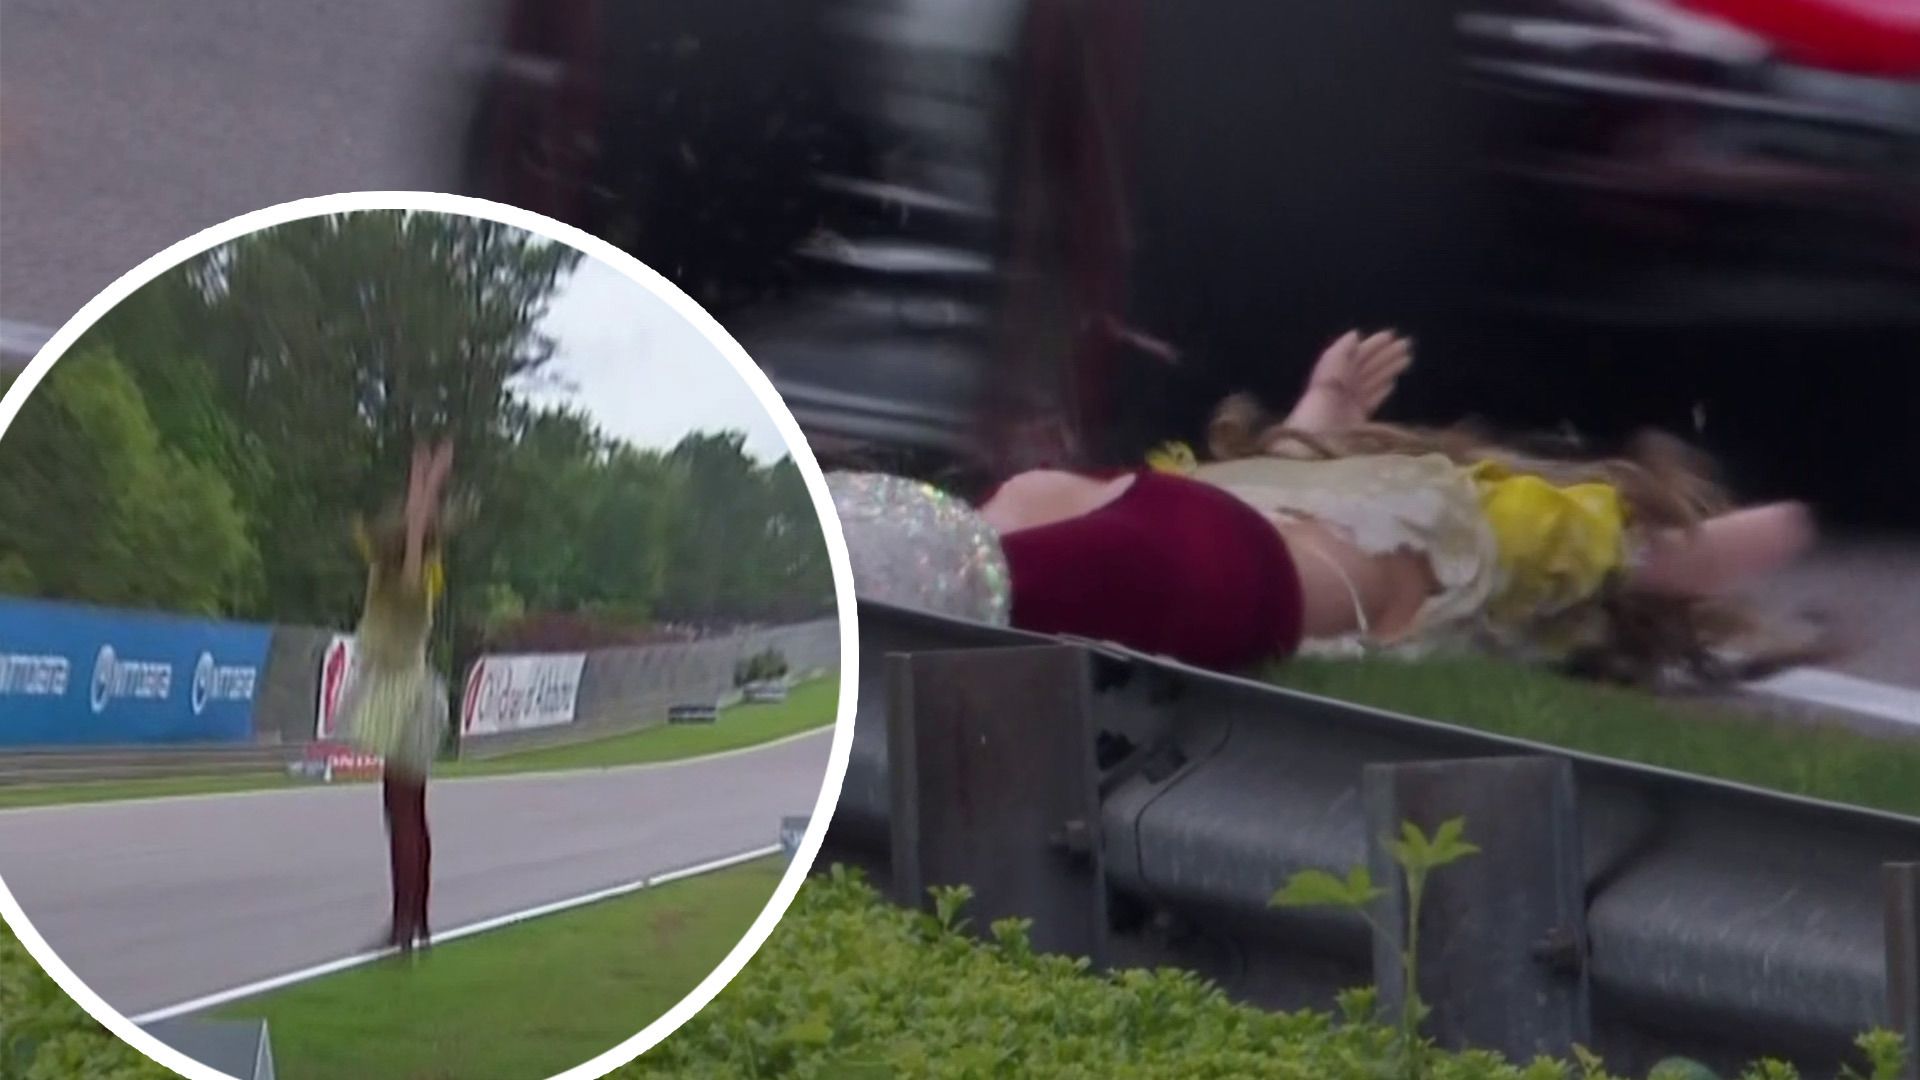 'Part of the eccentric art': Hanging mannequin falls onto track during IndyCar race